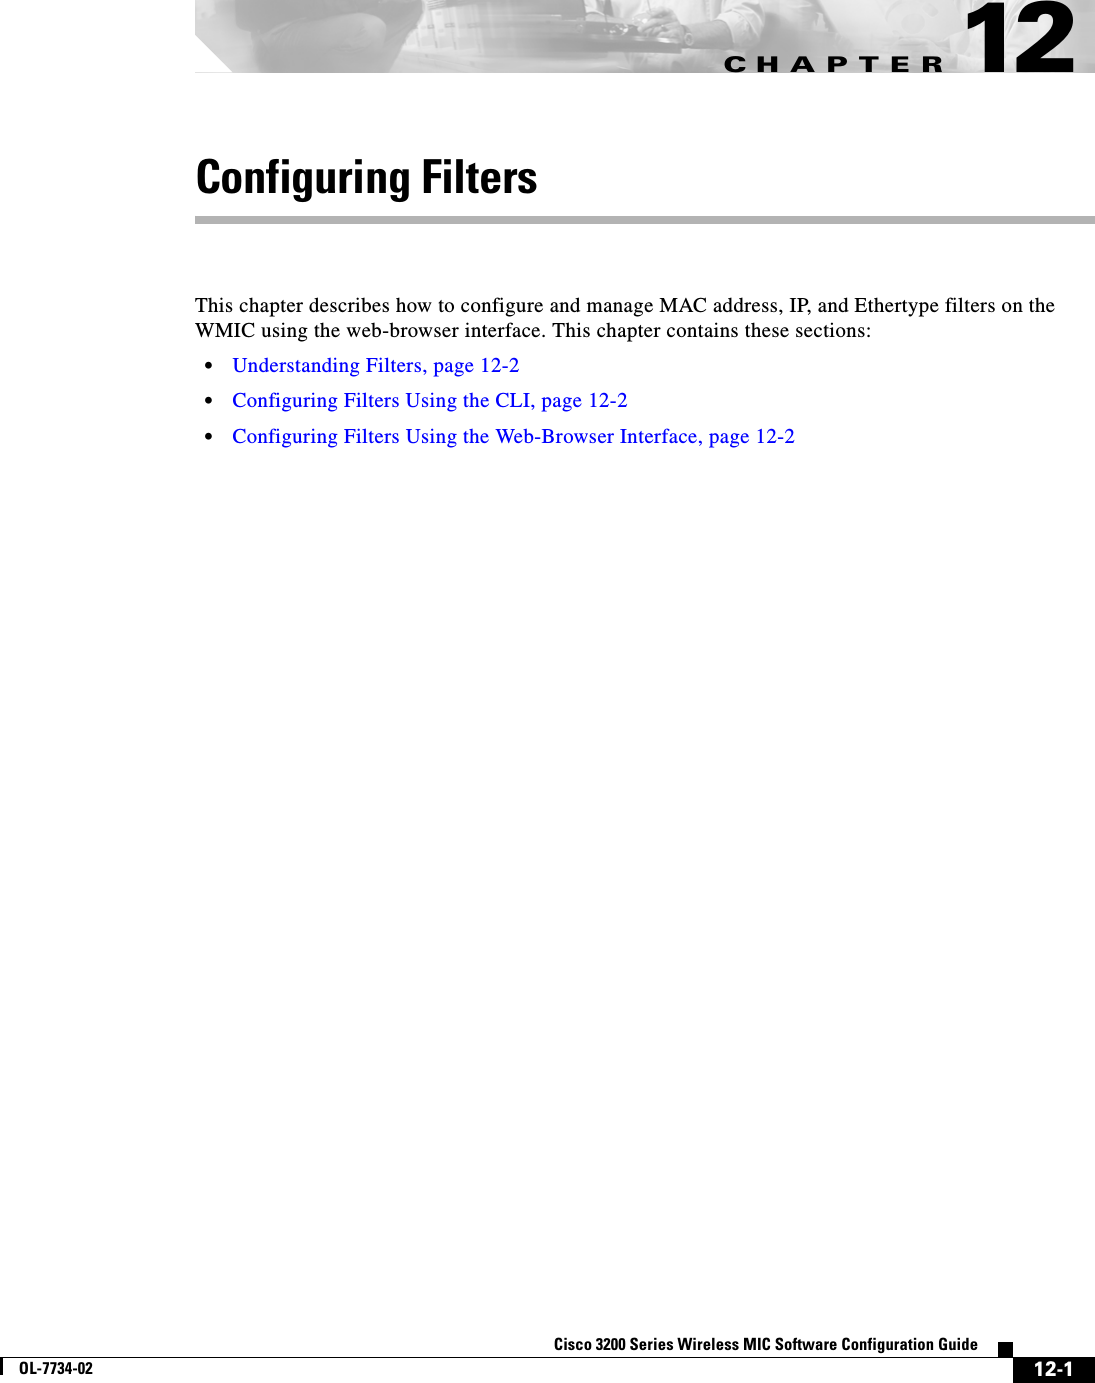 CHAPTER12-1Cisco 3200 Series Wireless MIC Software Configuration GuideOL-7734-0212Configuring FiltersThis chapter describes how to configure and manage MAC address, IP, and Ethertype filters on the WMIC using the web-browser interface. This chapter contains these sections:•Understanding Filters, page 12-2•Configuring Filters Using the CLI, page 12-2•Configuring Filters Using the Web-Browser Interface, page 12-2